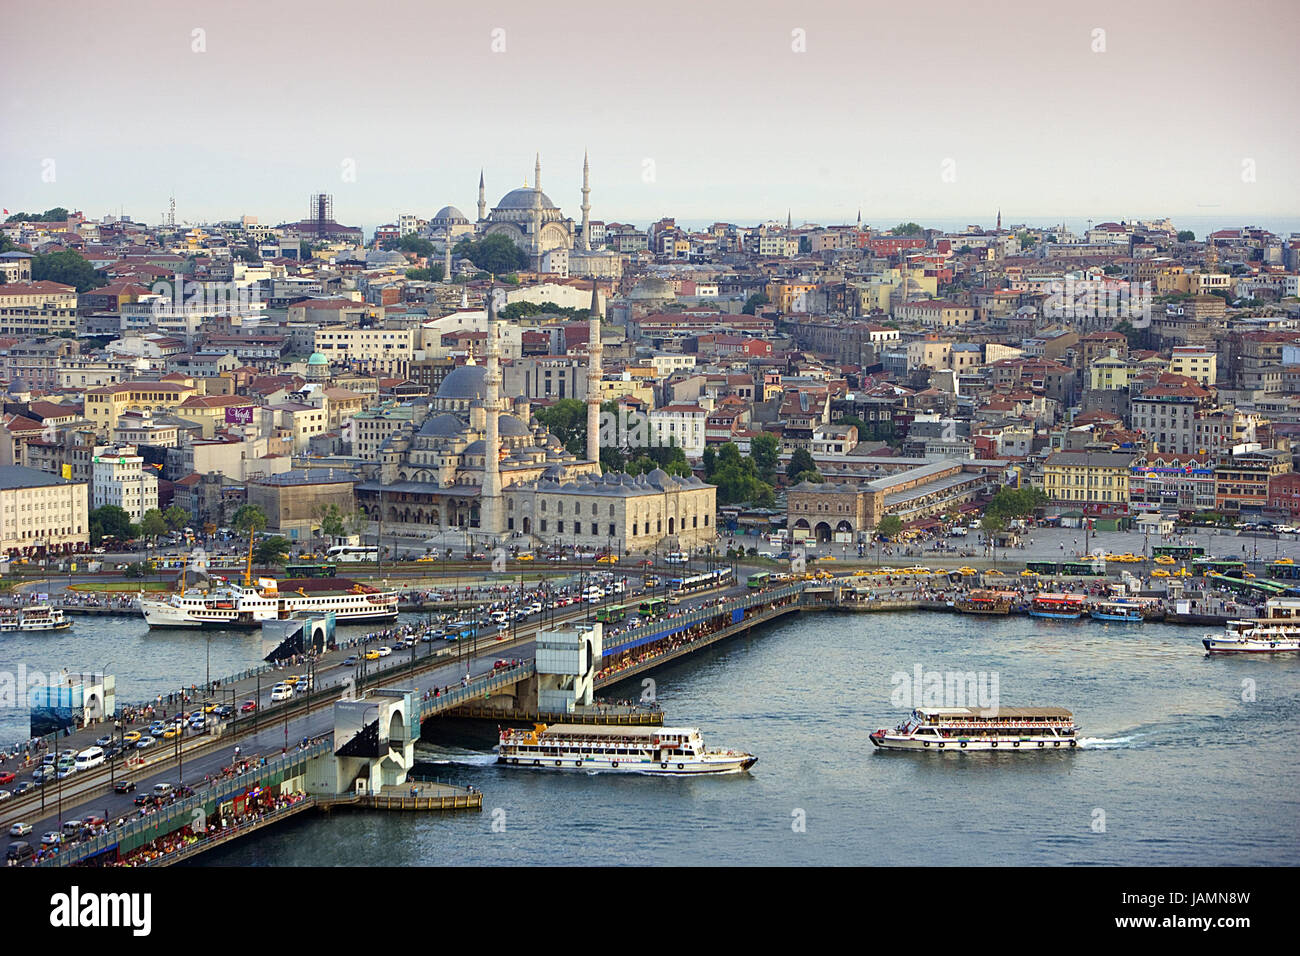 Turkey,Istanbul,town view,'the Golden Horn',Galata bridge,ships,town,city,metropolis,port,culture,place of interest,tourism,architecture,the Bosporus,sea,navigation,holiday ships,towers,minarets,mosque,domes, Stock Photo